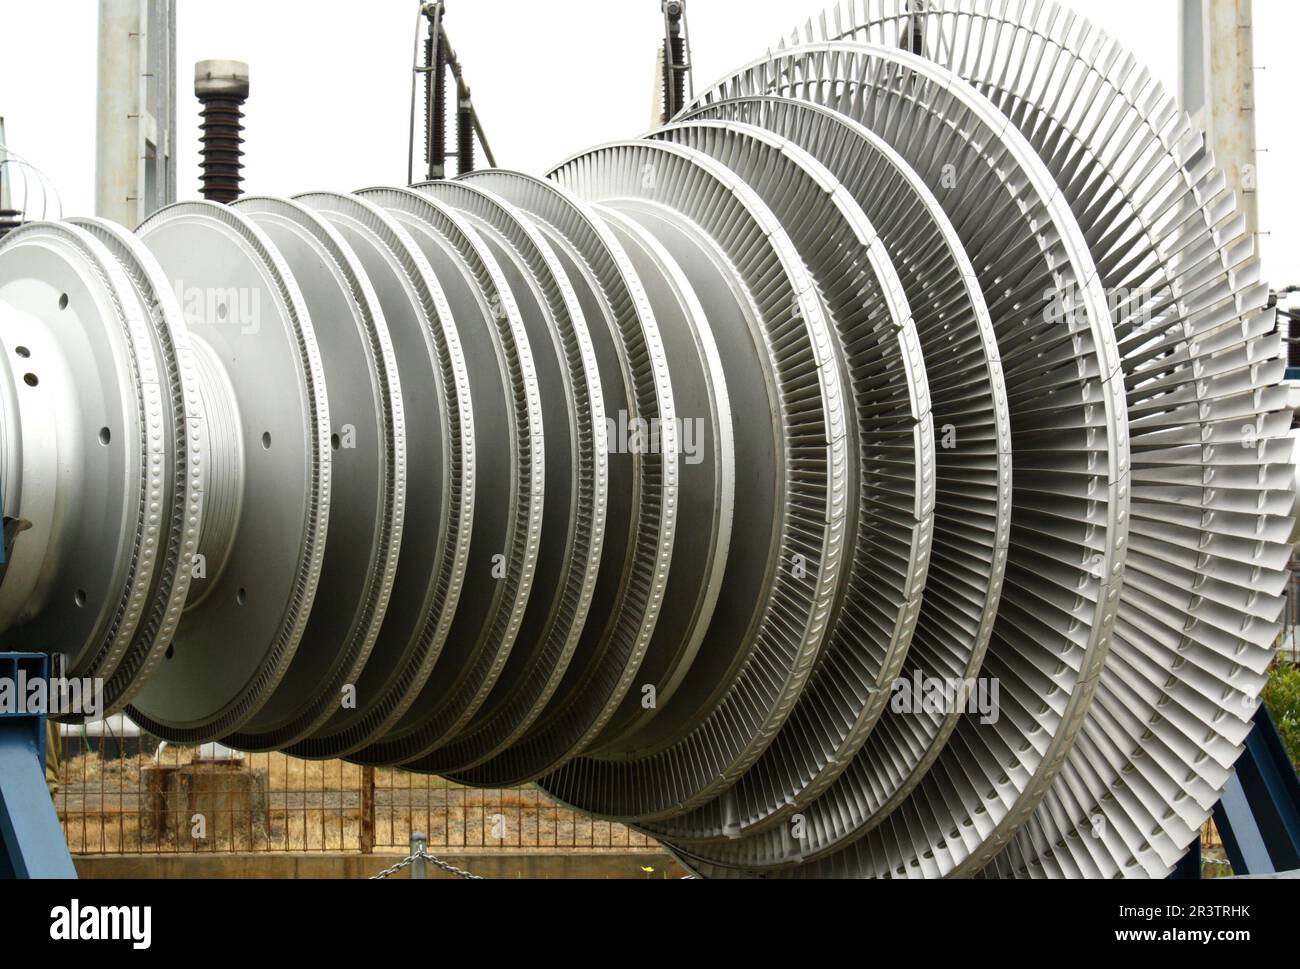 A steam turbine is a machine that extracts thermal energy from